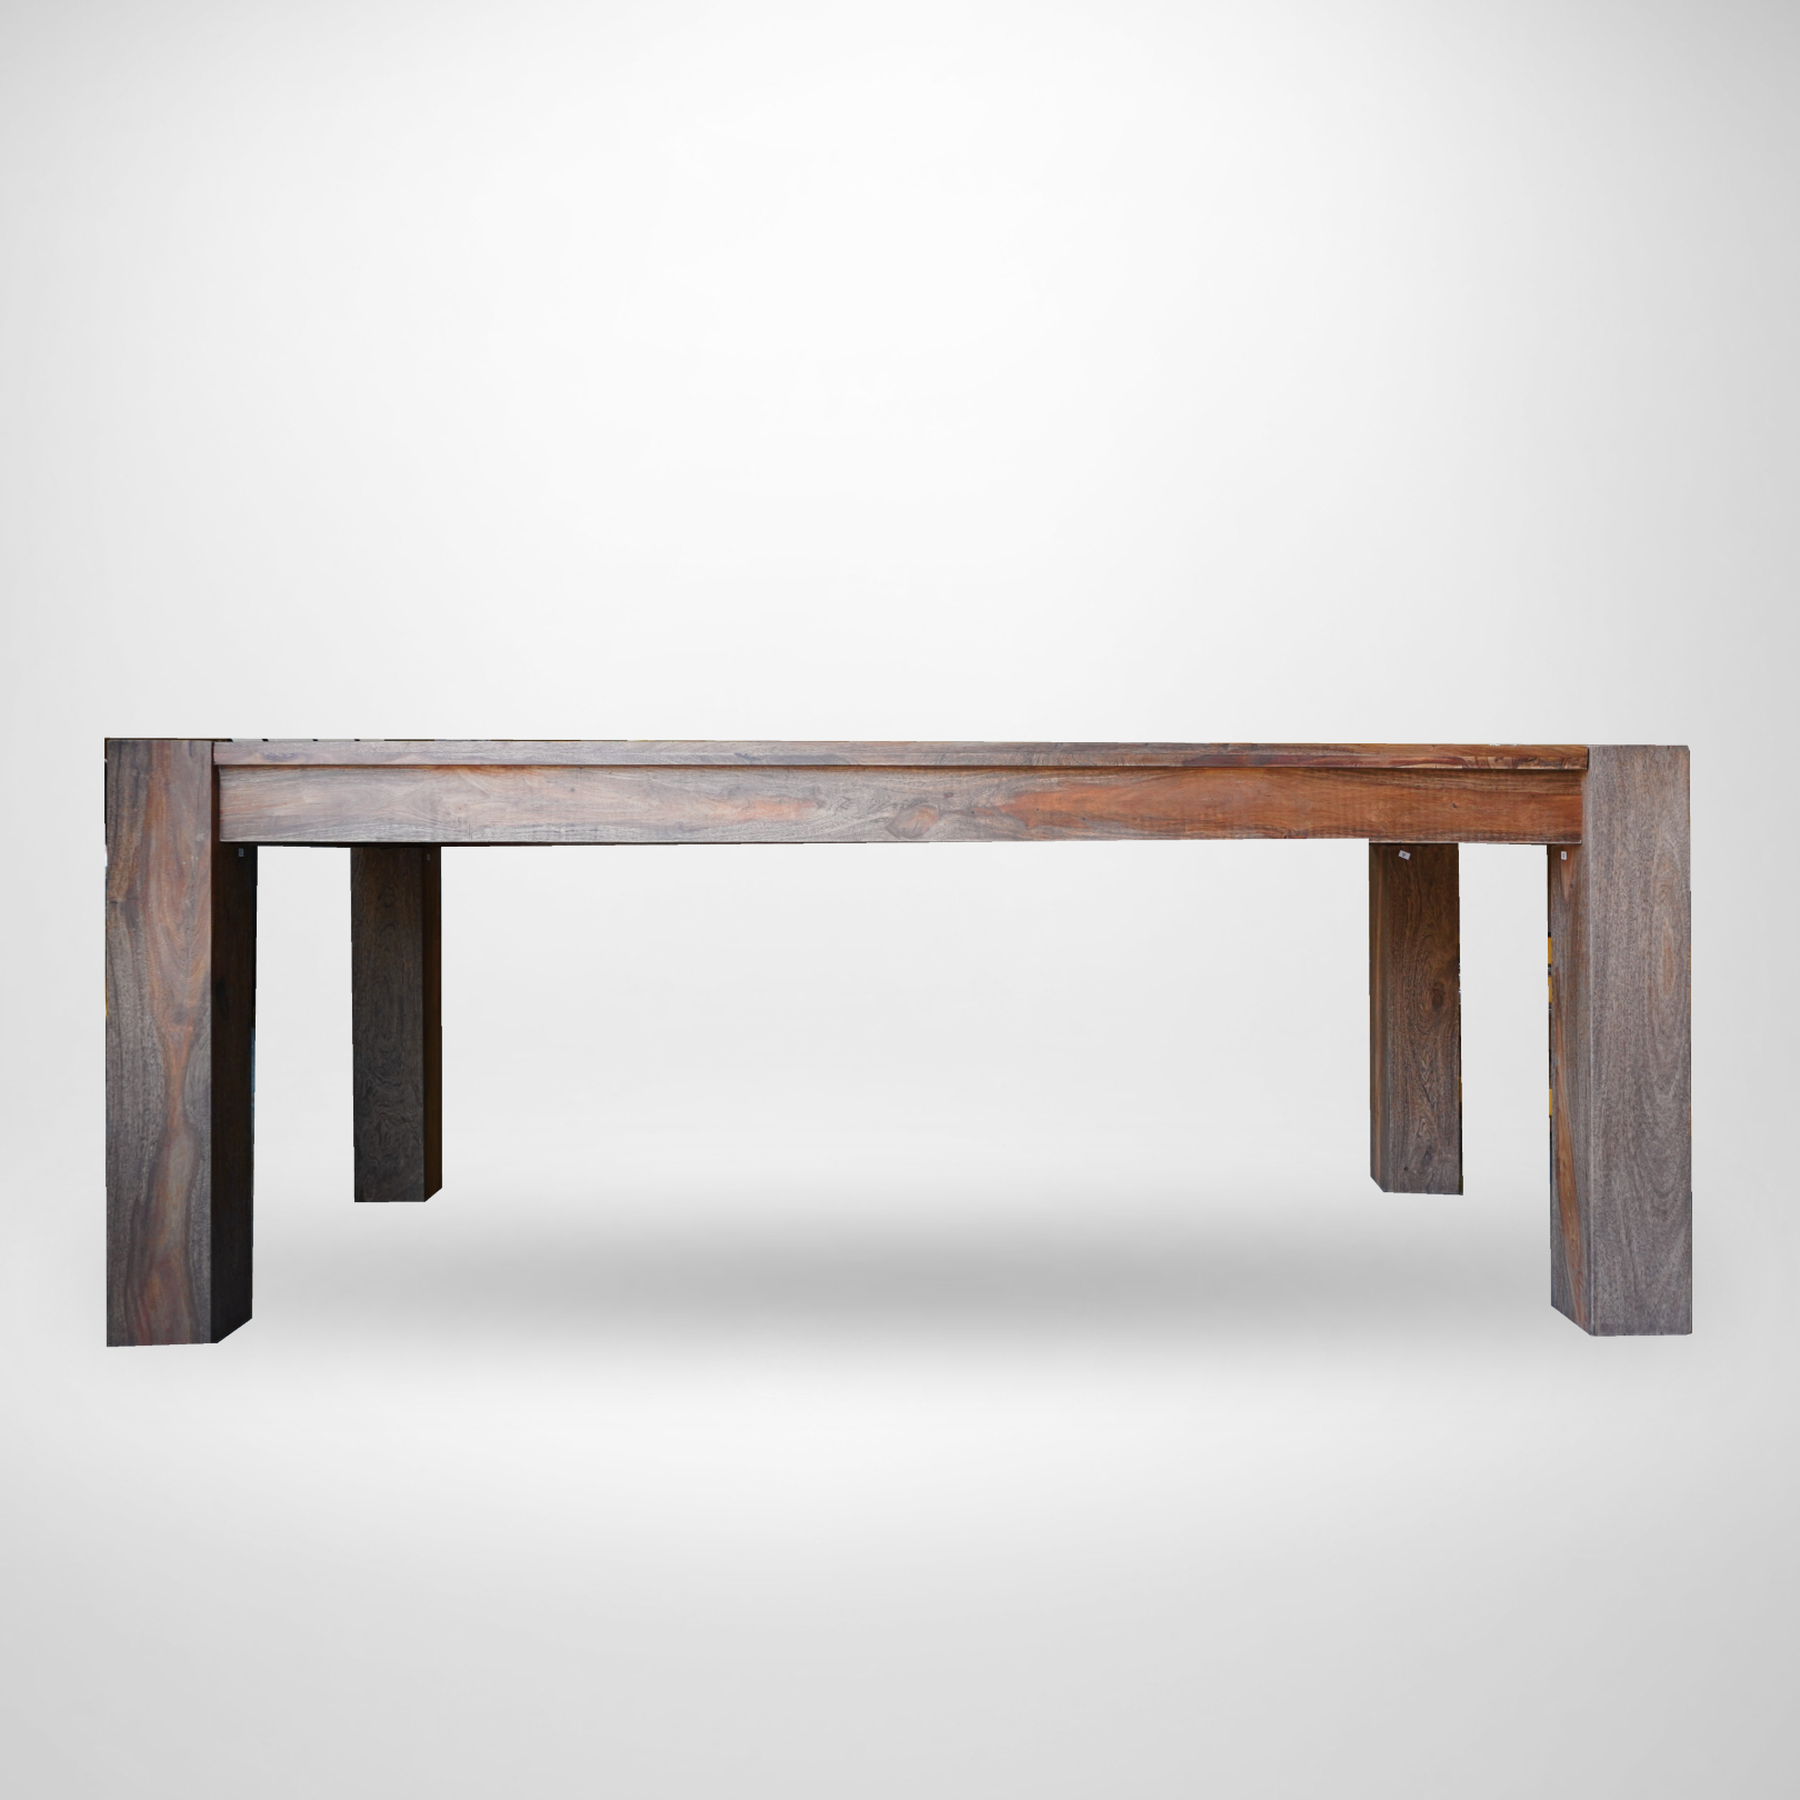 Zen Dining Table | Wooden Dining Room Table | Rectangular Dining Table | 4 Sizes Available